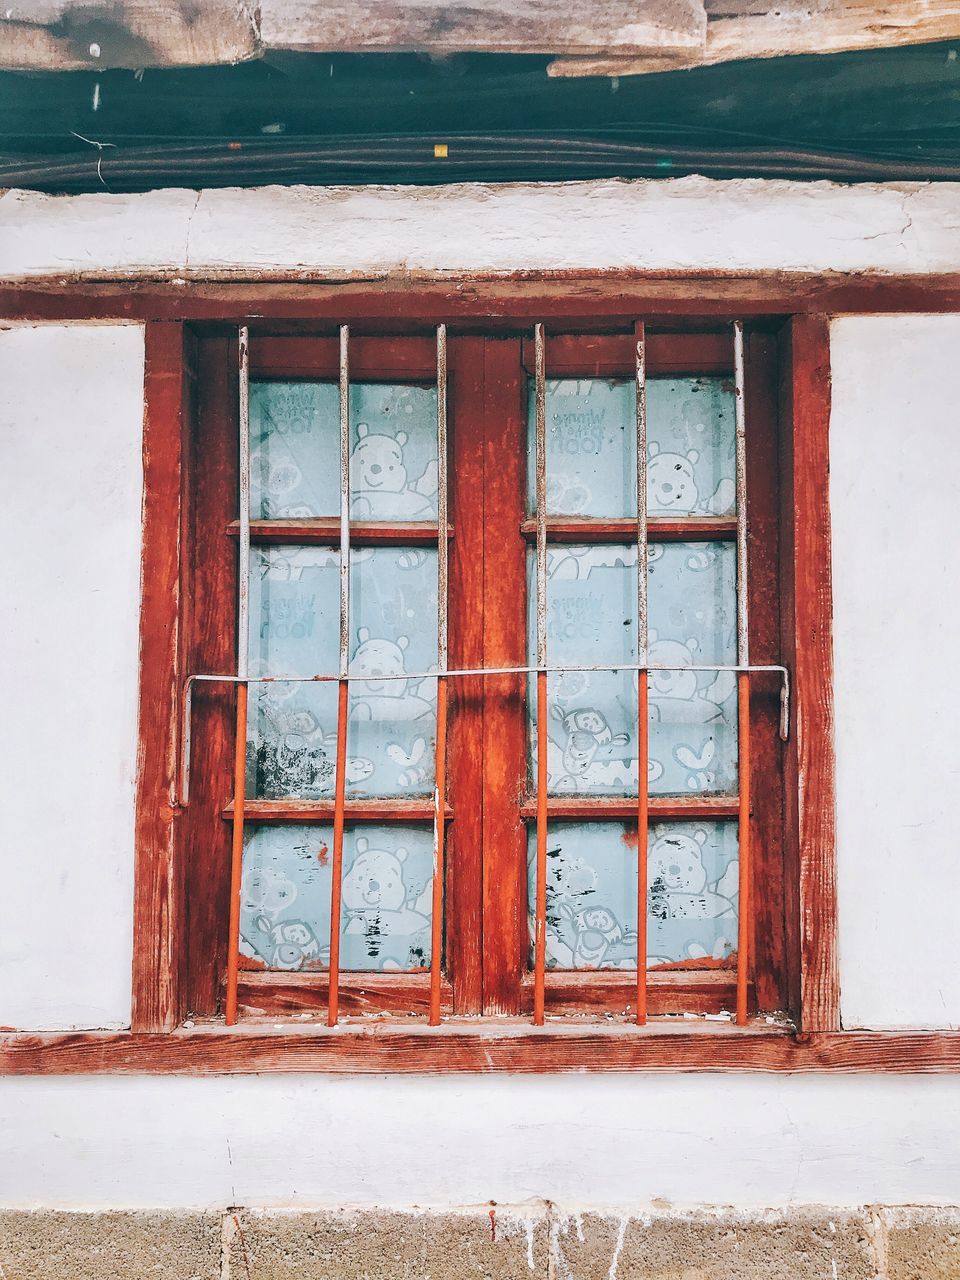 window, architecture, built structure, red, wall, building exterior, blue, building, no people, house, wood, day, door, facade, closed, brick, wall - building feature, glass, old, outdoors, urban area, residential district, entrance, weathered, abandoned, window covering, security, protection, window frame, nature